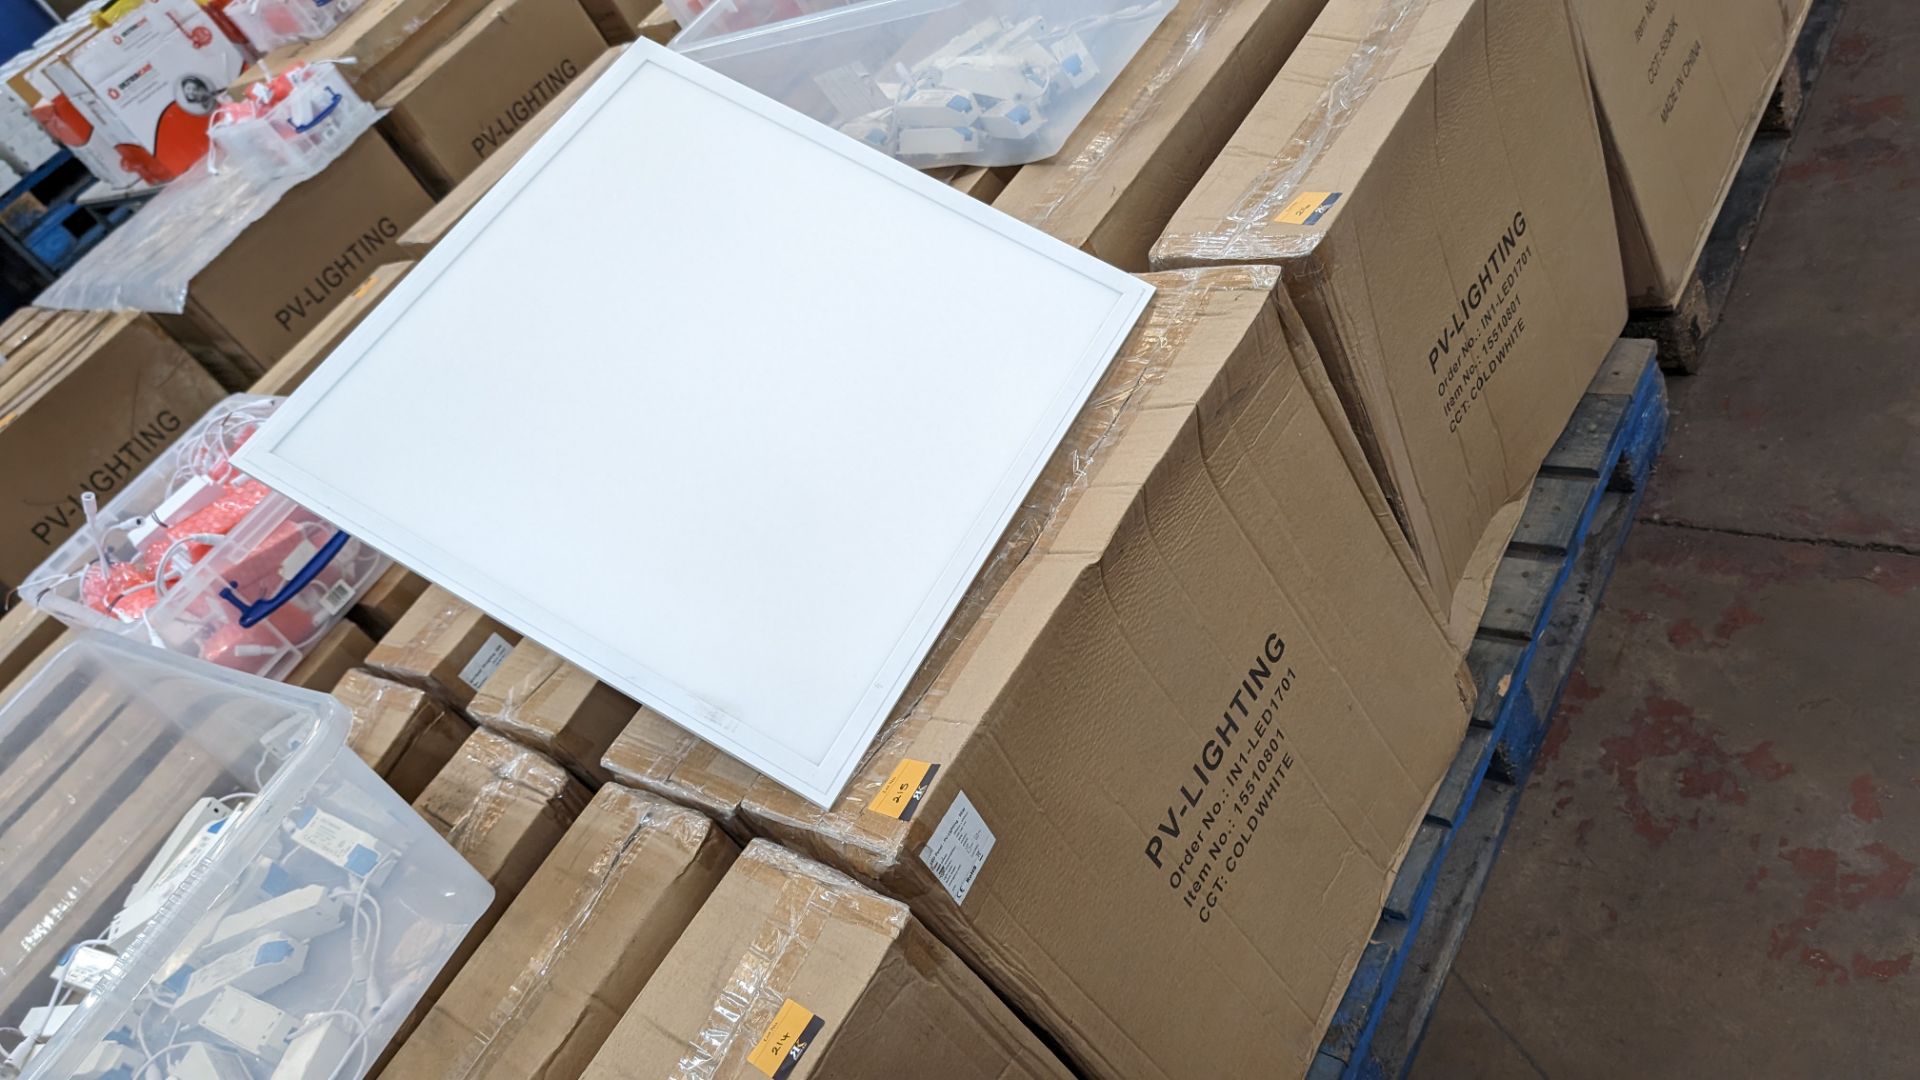 16 off 600mm x 600mm 36w 6000k 4320 lumens cold white LED lighting panels. 36w drivers. This lot c - Image 2 of 16